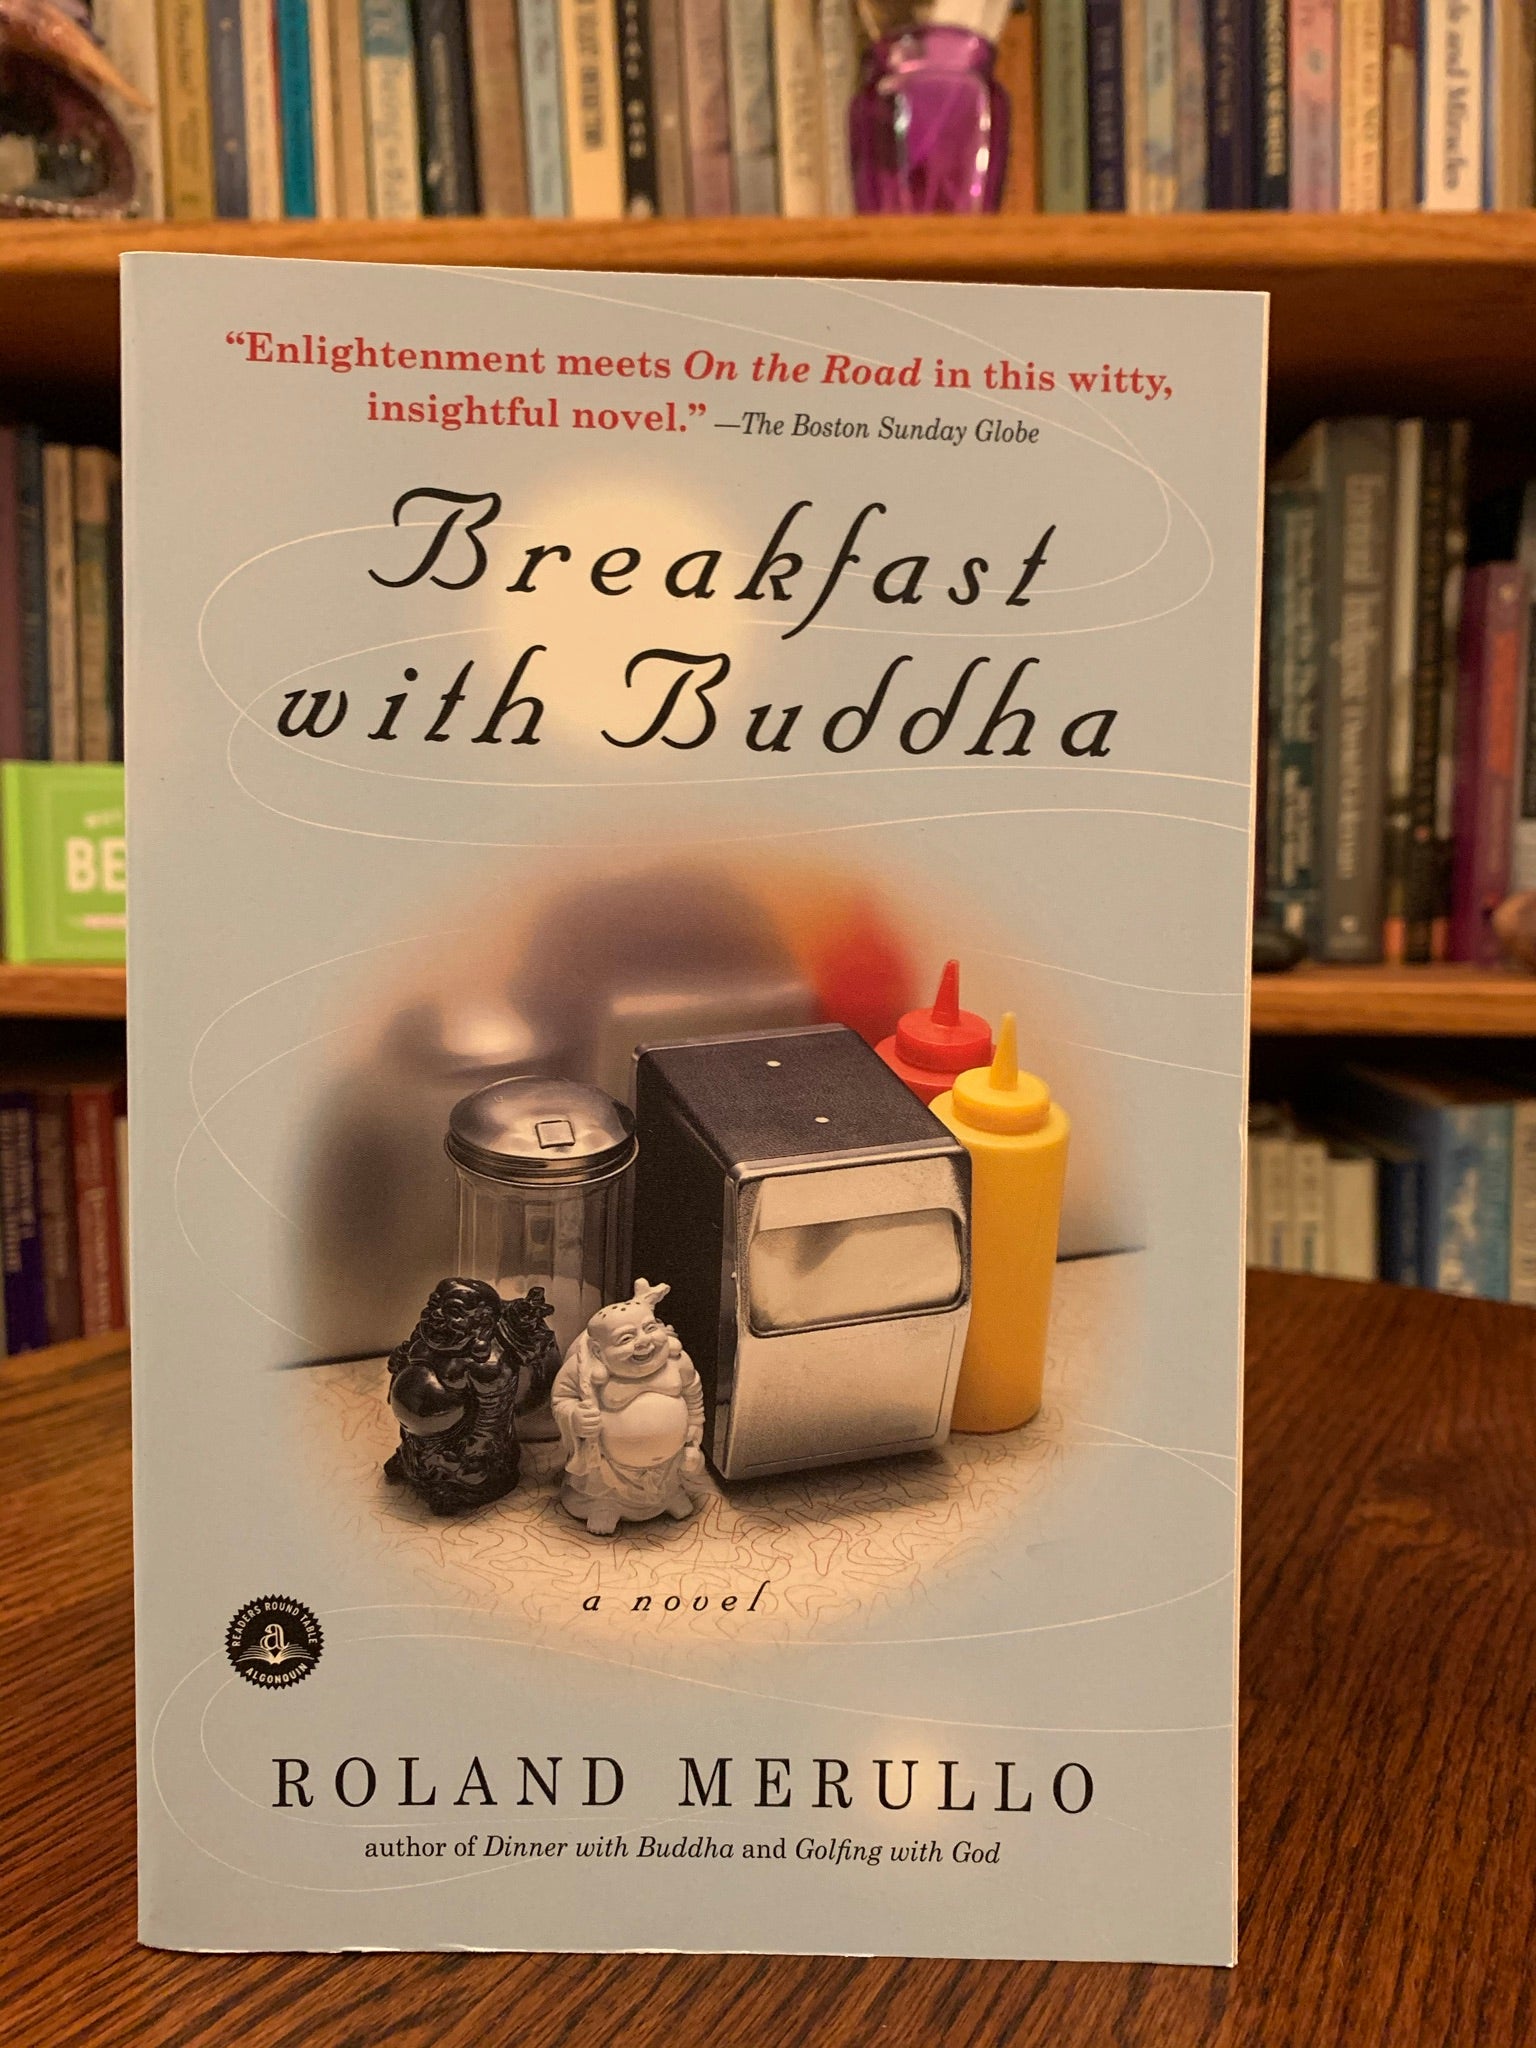 Front Cover of Breakfast With Buddha. Let me just tell you that this book and the other two in this series are some of the most enjoyable I have read. I have even re-read them and I rarely do that. This book is fiction, but laced with wonderful spiritual insights and laugh-out-loud moments! It is fun to read and deeply touching to the heart, soul and spirit. The protagonist gets stuck taking a cross-country drive with a spiritual guru and there the fun begins. Cost is $15.95.